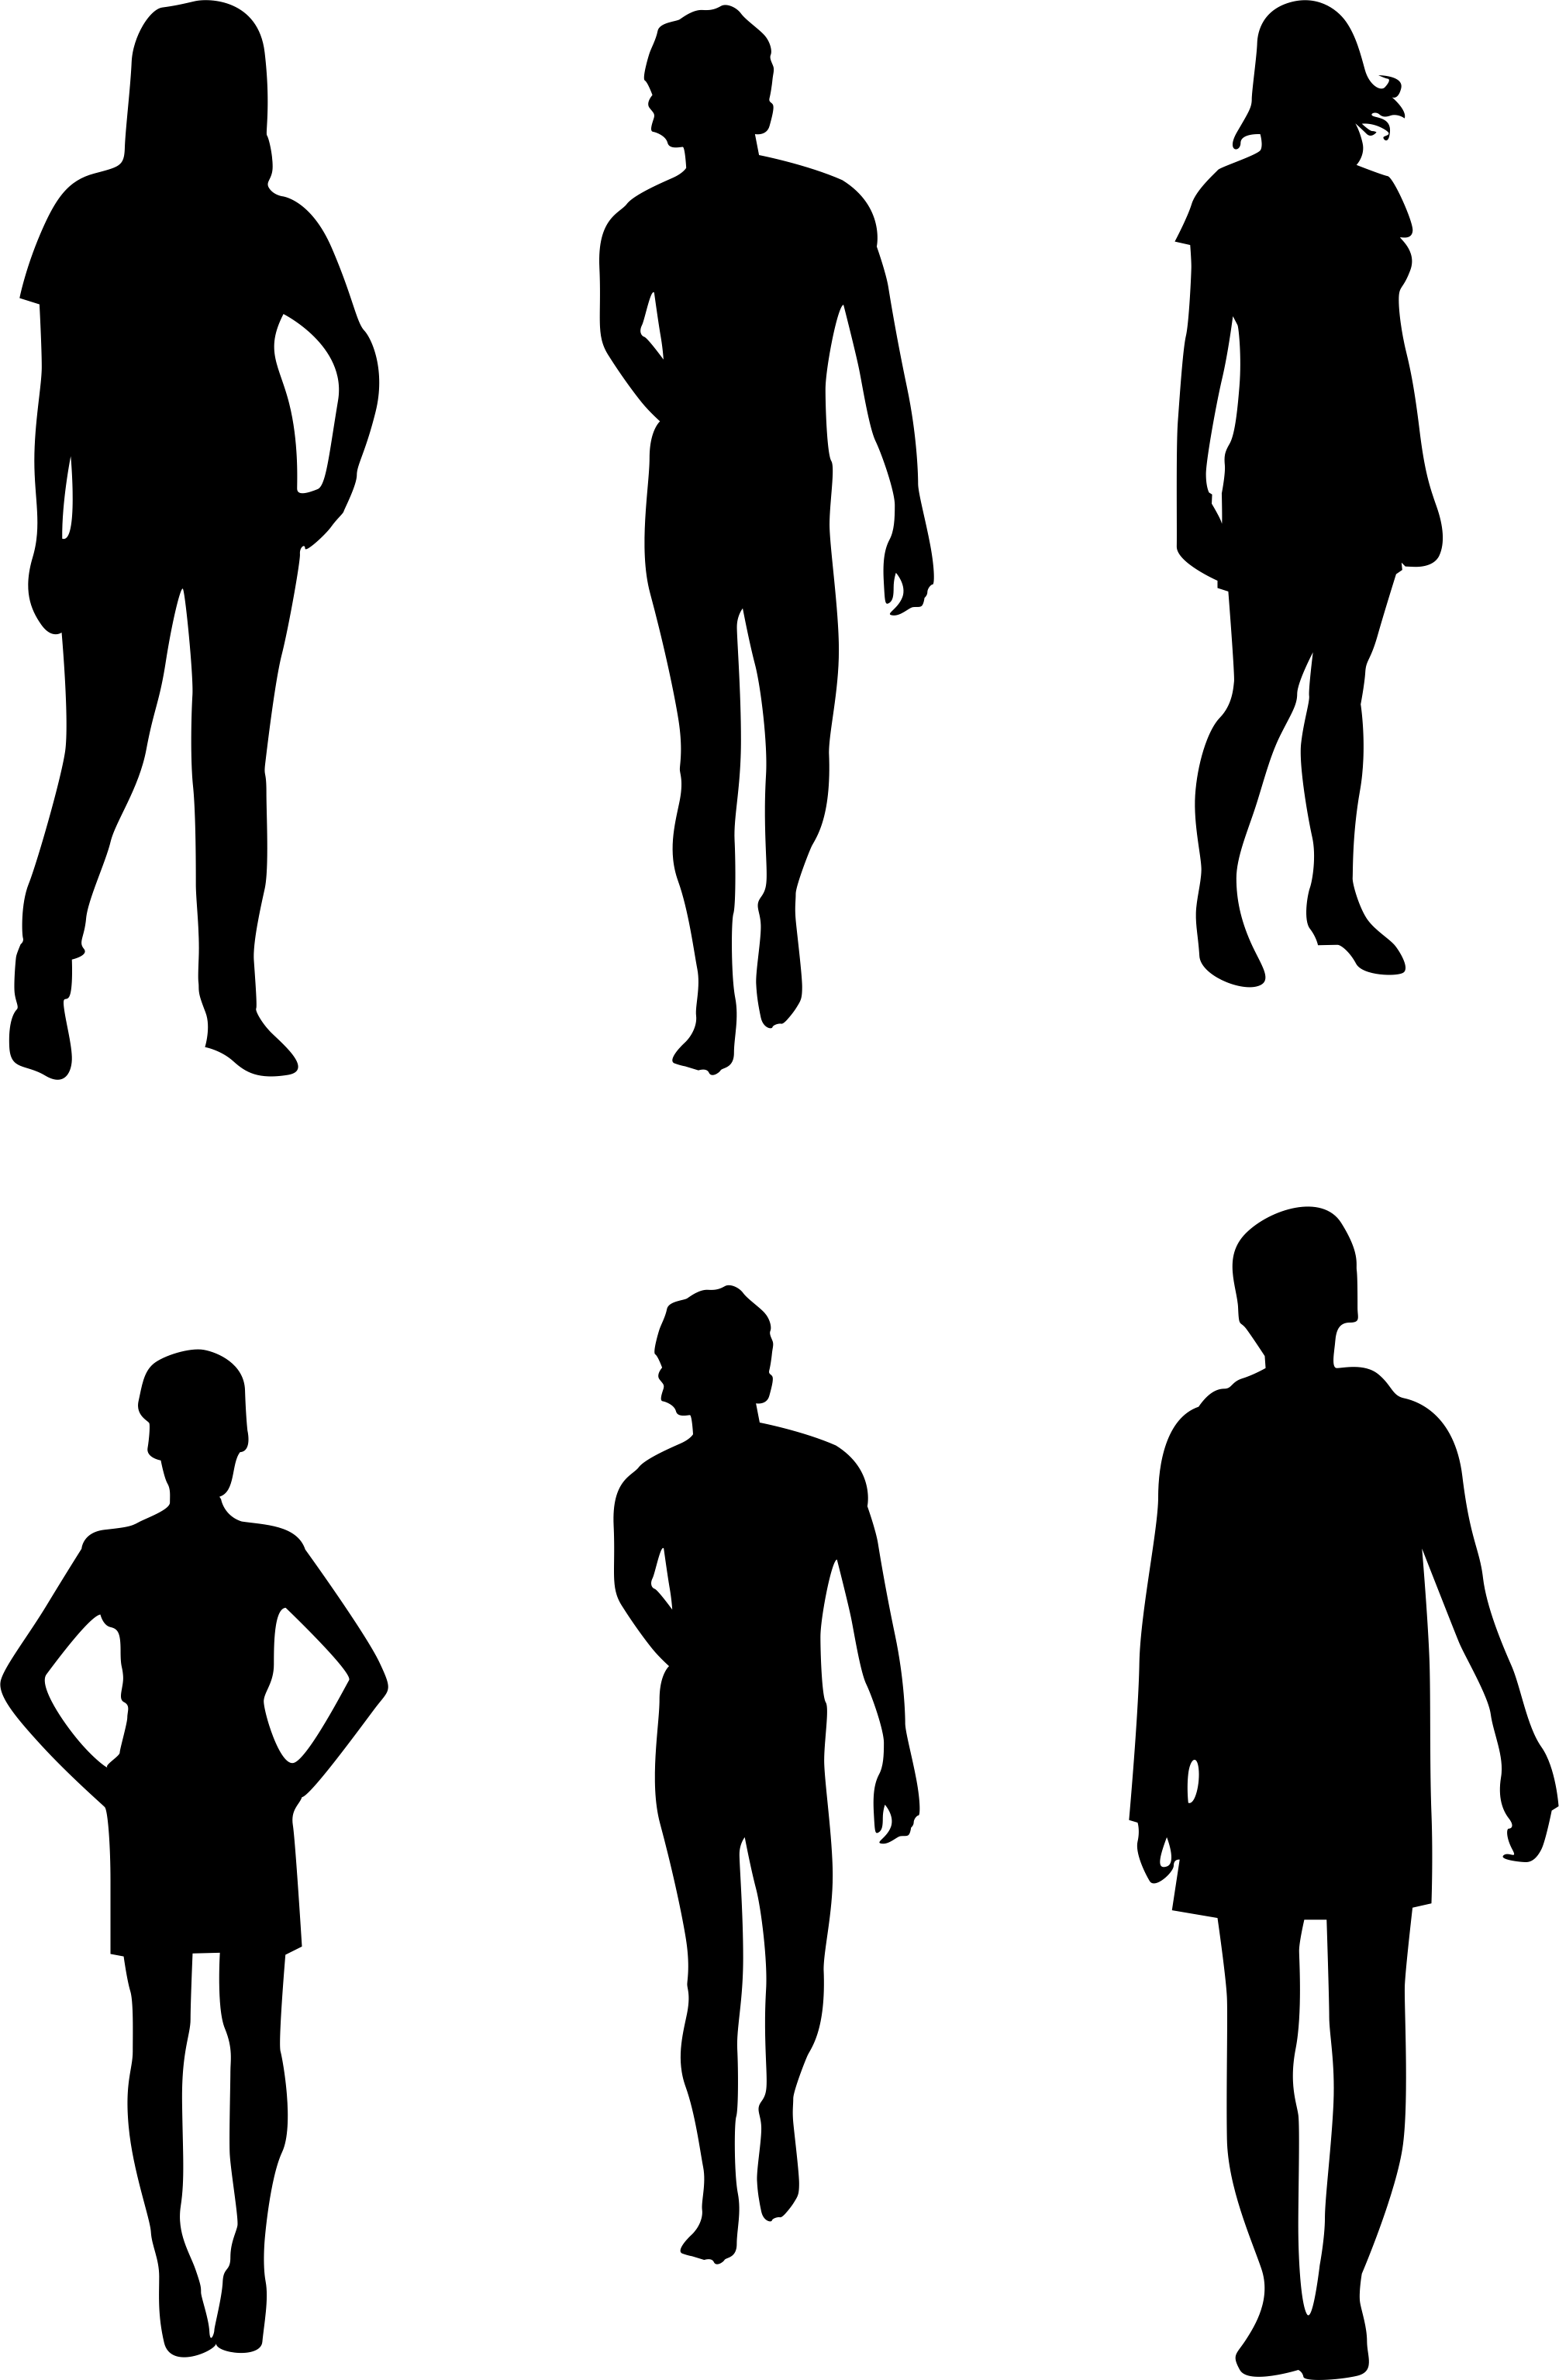 Photoshop People Silhouettes | Courseimage